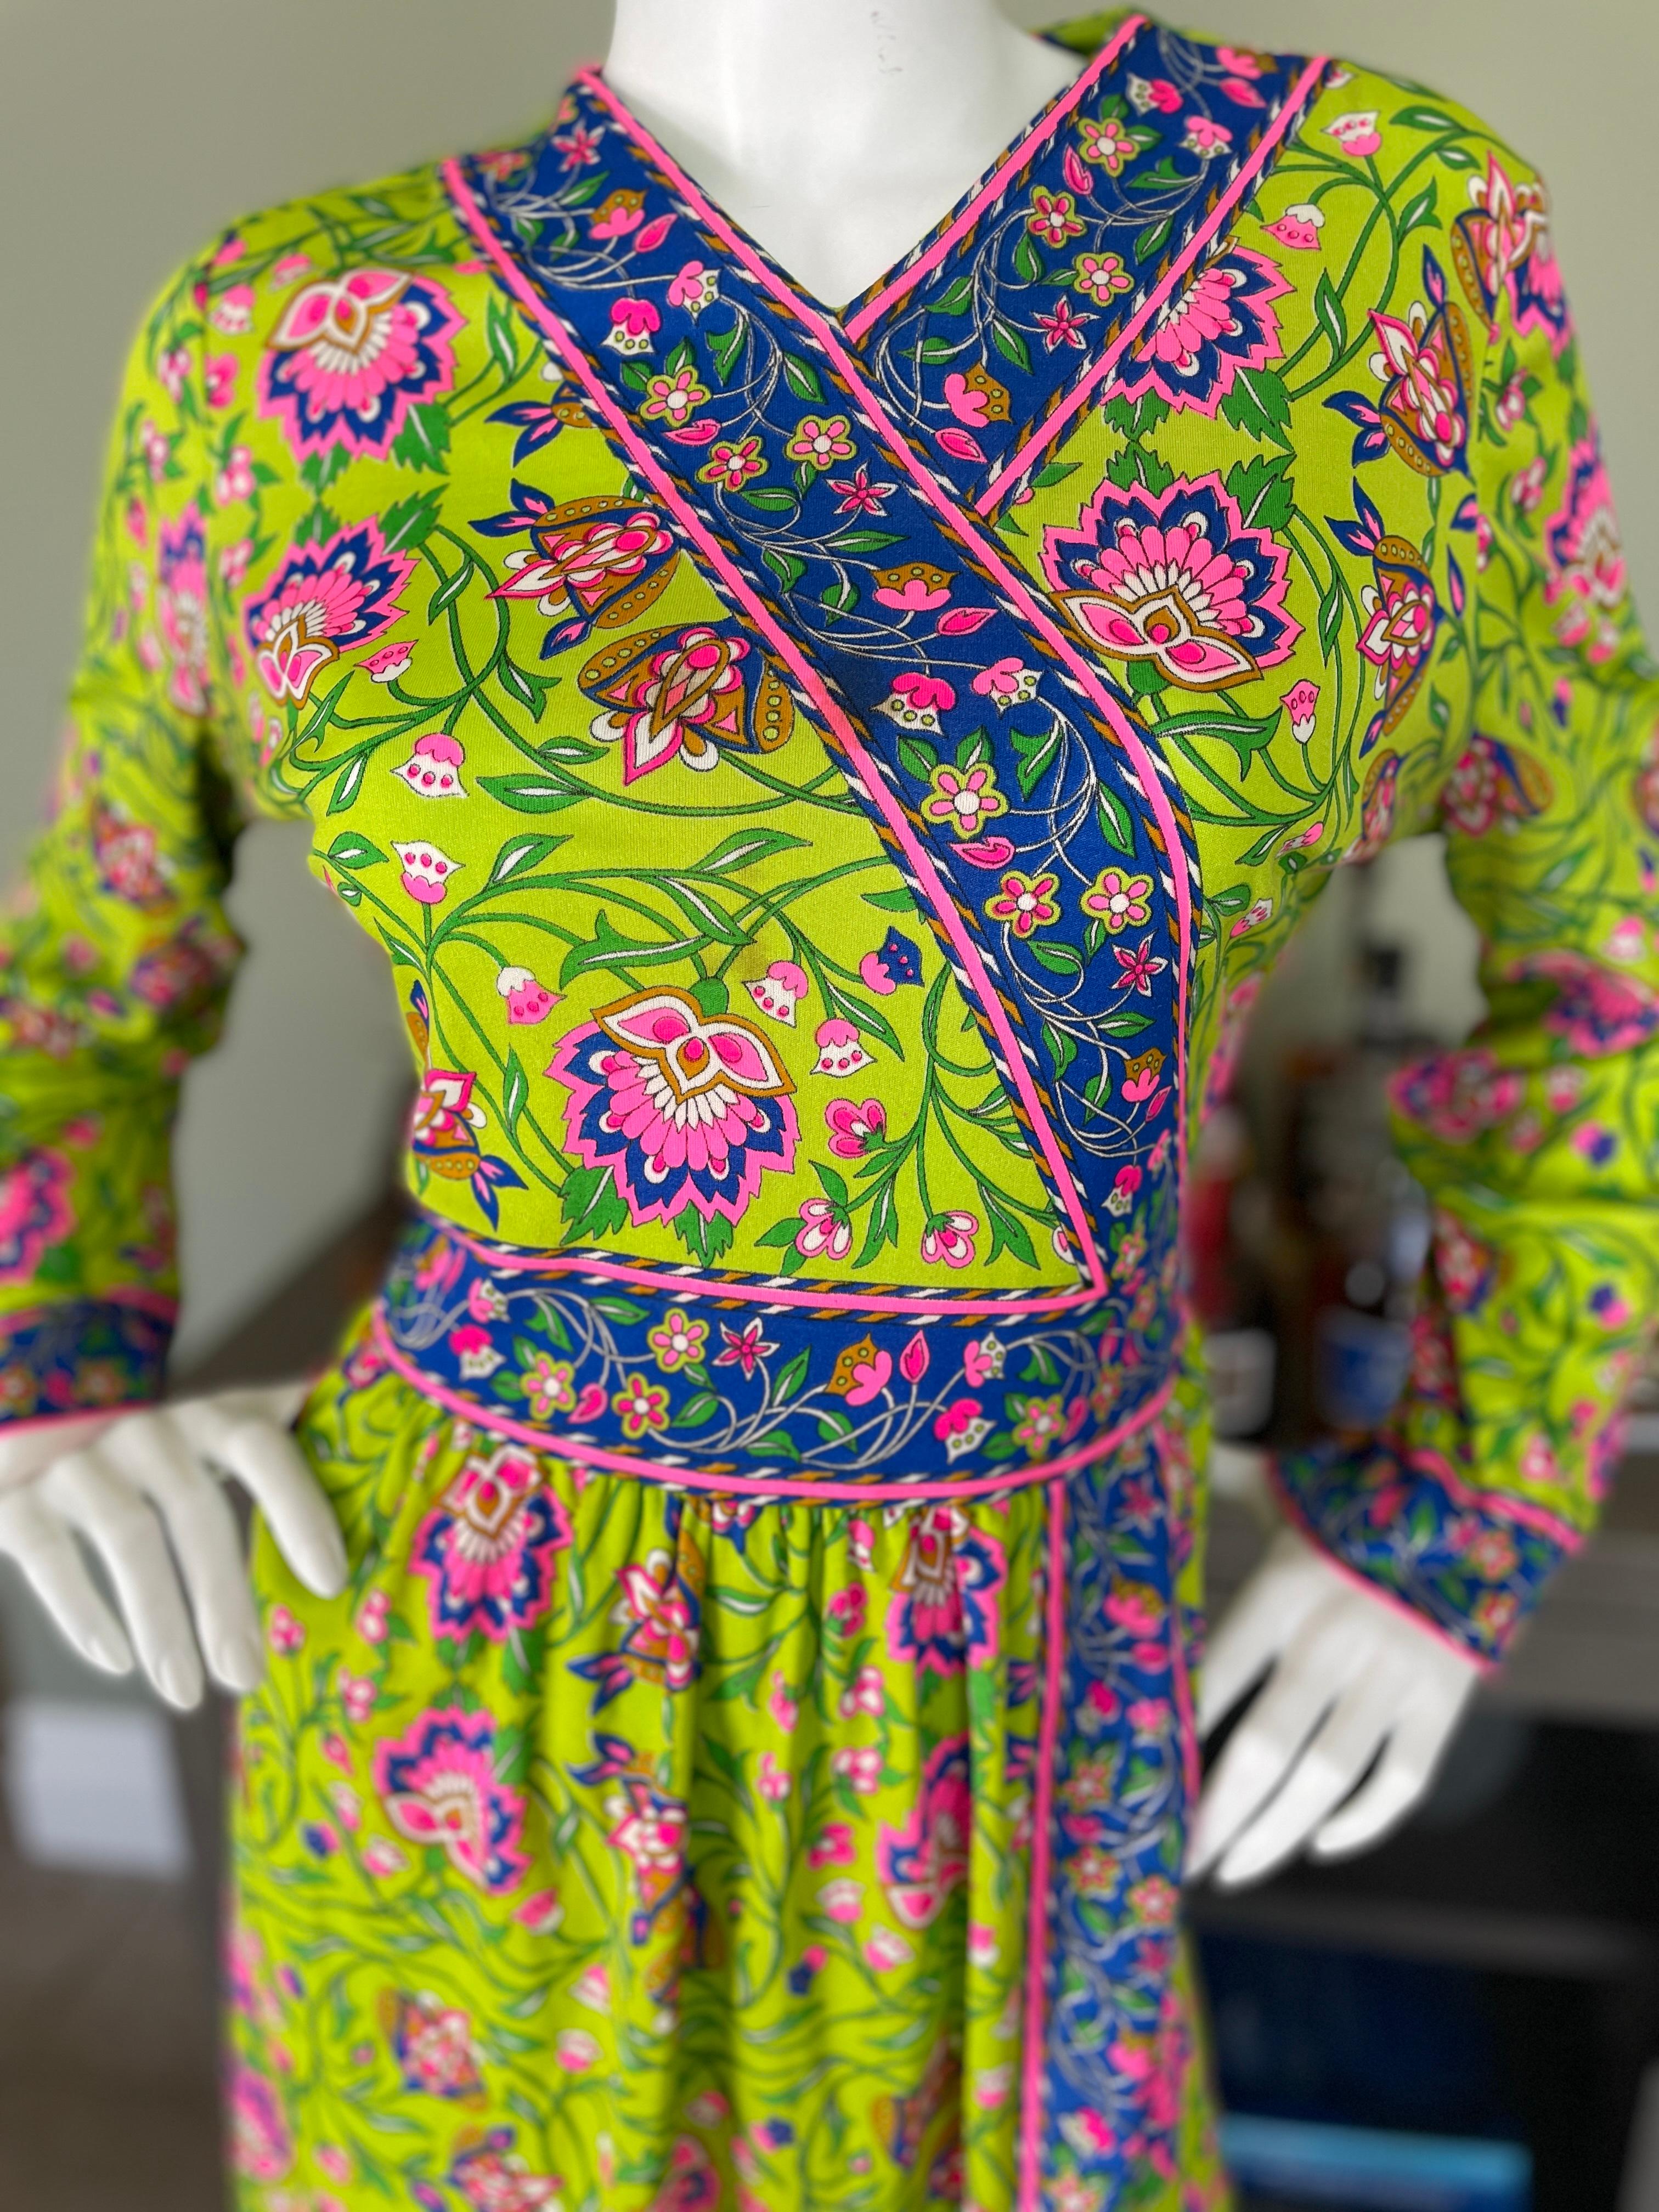 Mr Dino 1970's Psychedelic Floral Jersey Dress Vintage Size 16 In Good Condition For Sale In Cloverdale, CA